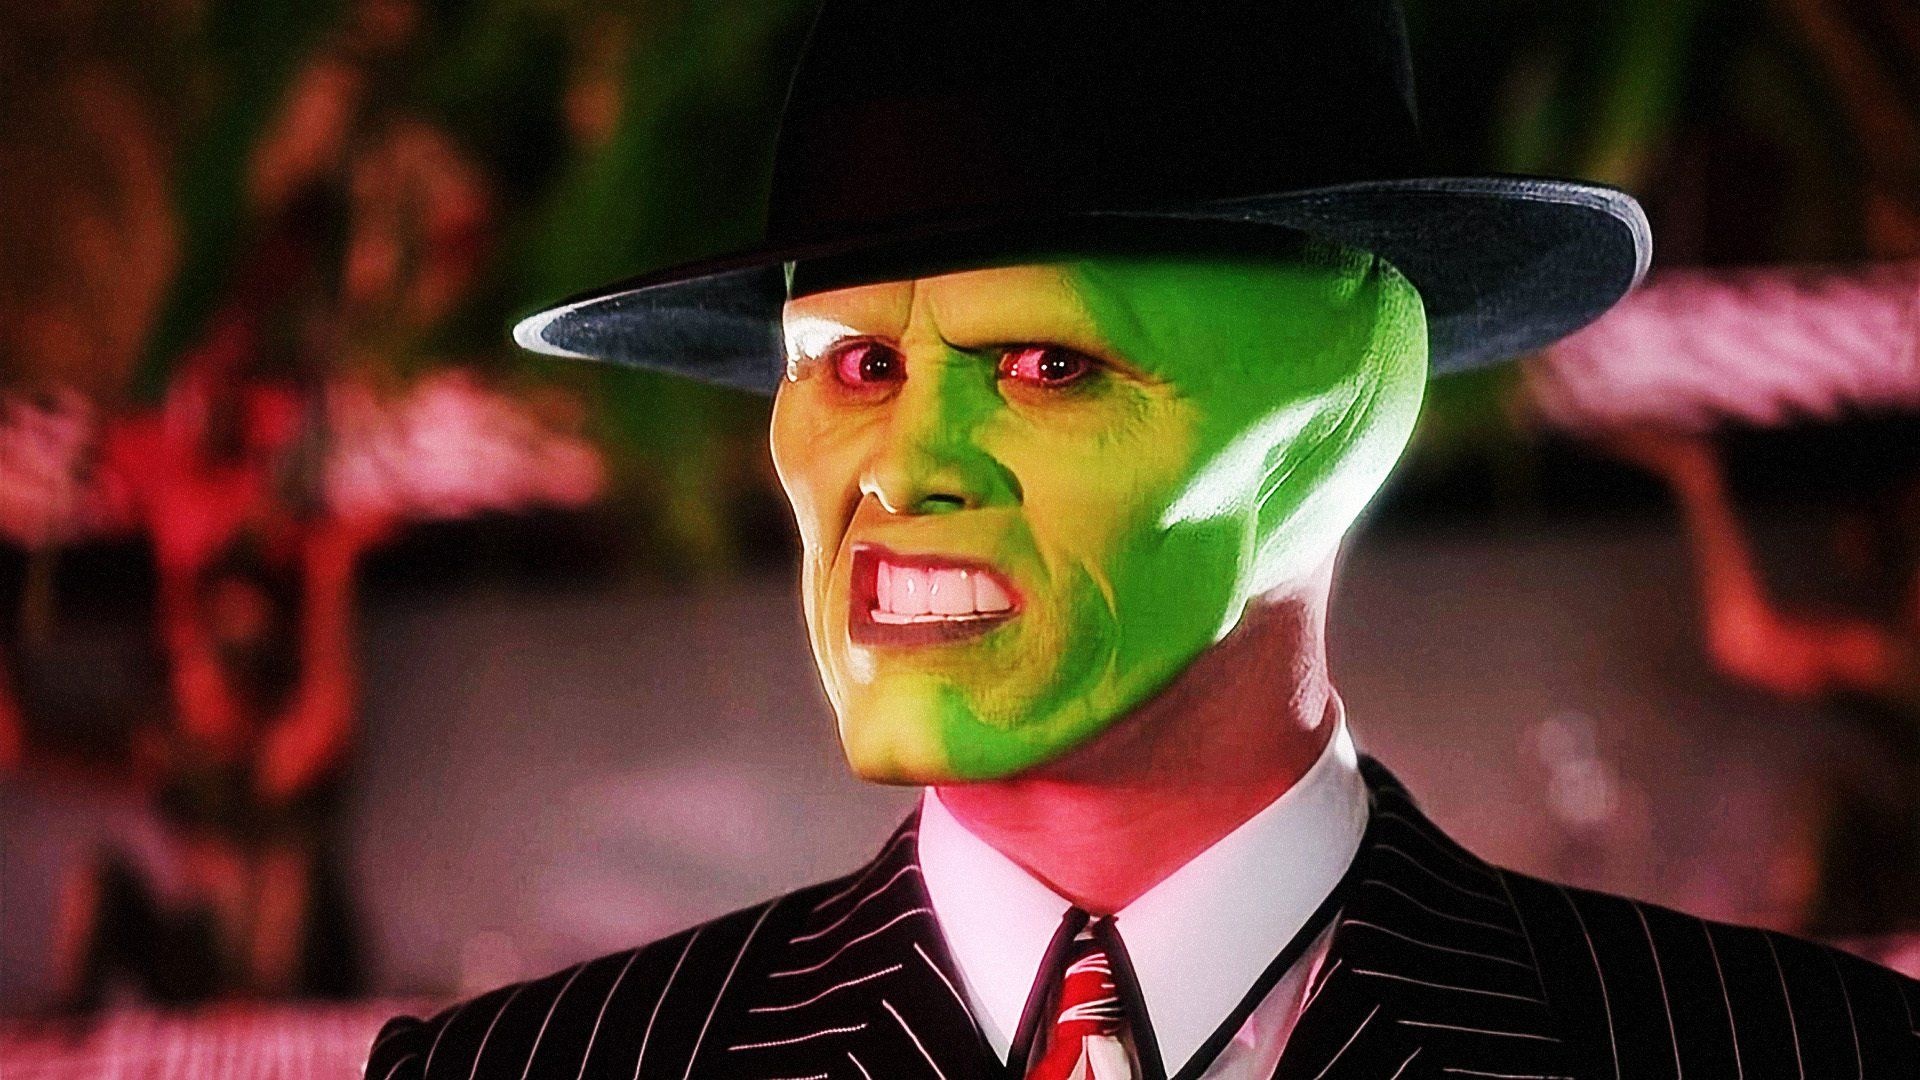 Jim Carrey, The Mask wallpapers, HD background, Comedy classic, 1920x1080 Full HD Desktop